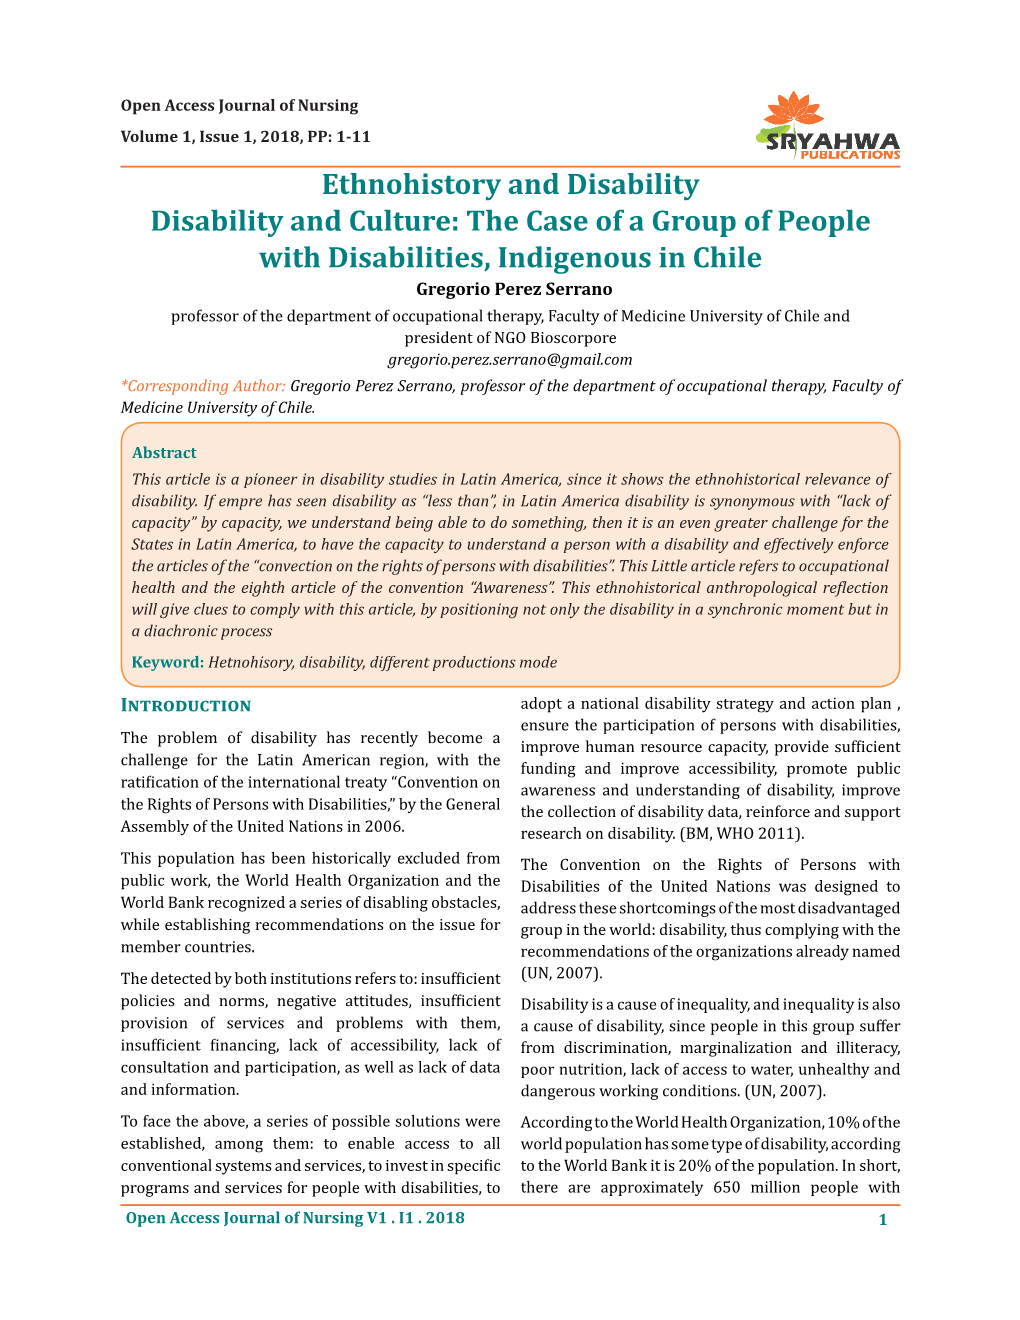 The Case of a Group of People with Disabilities, Indigenous in Chile Gregorio Perez Serrano